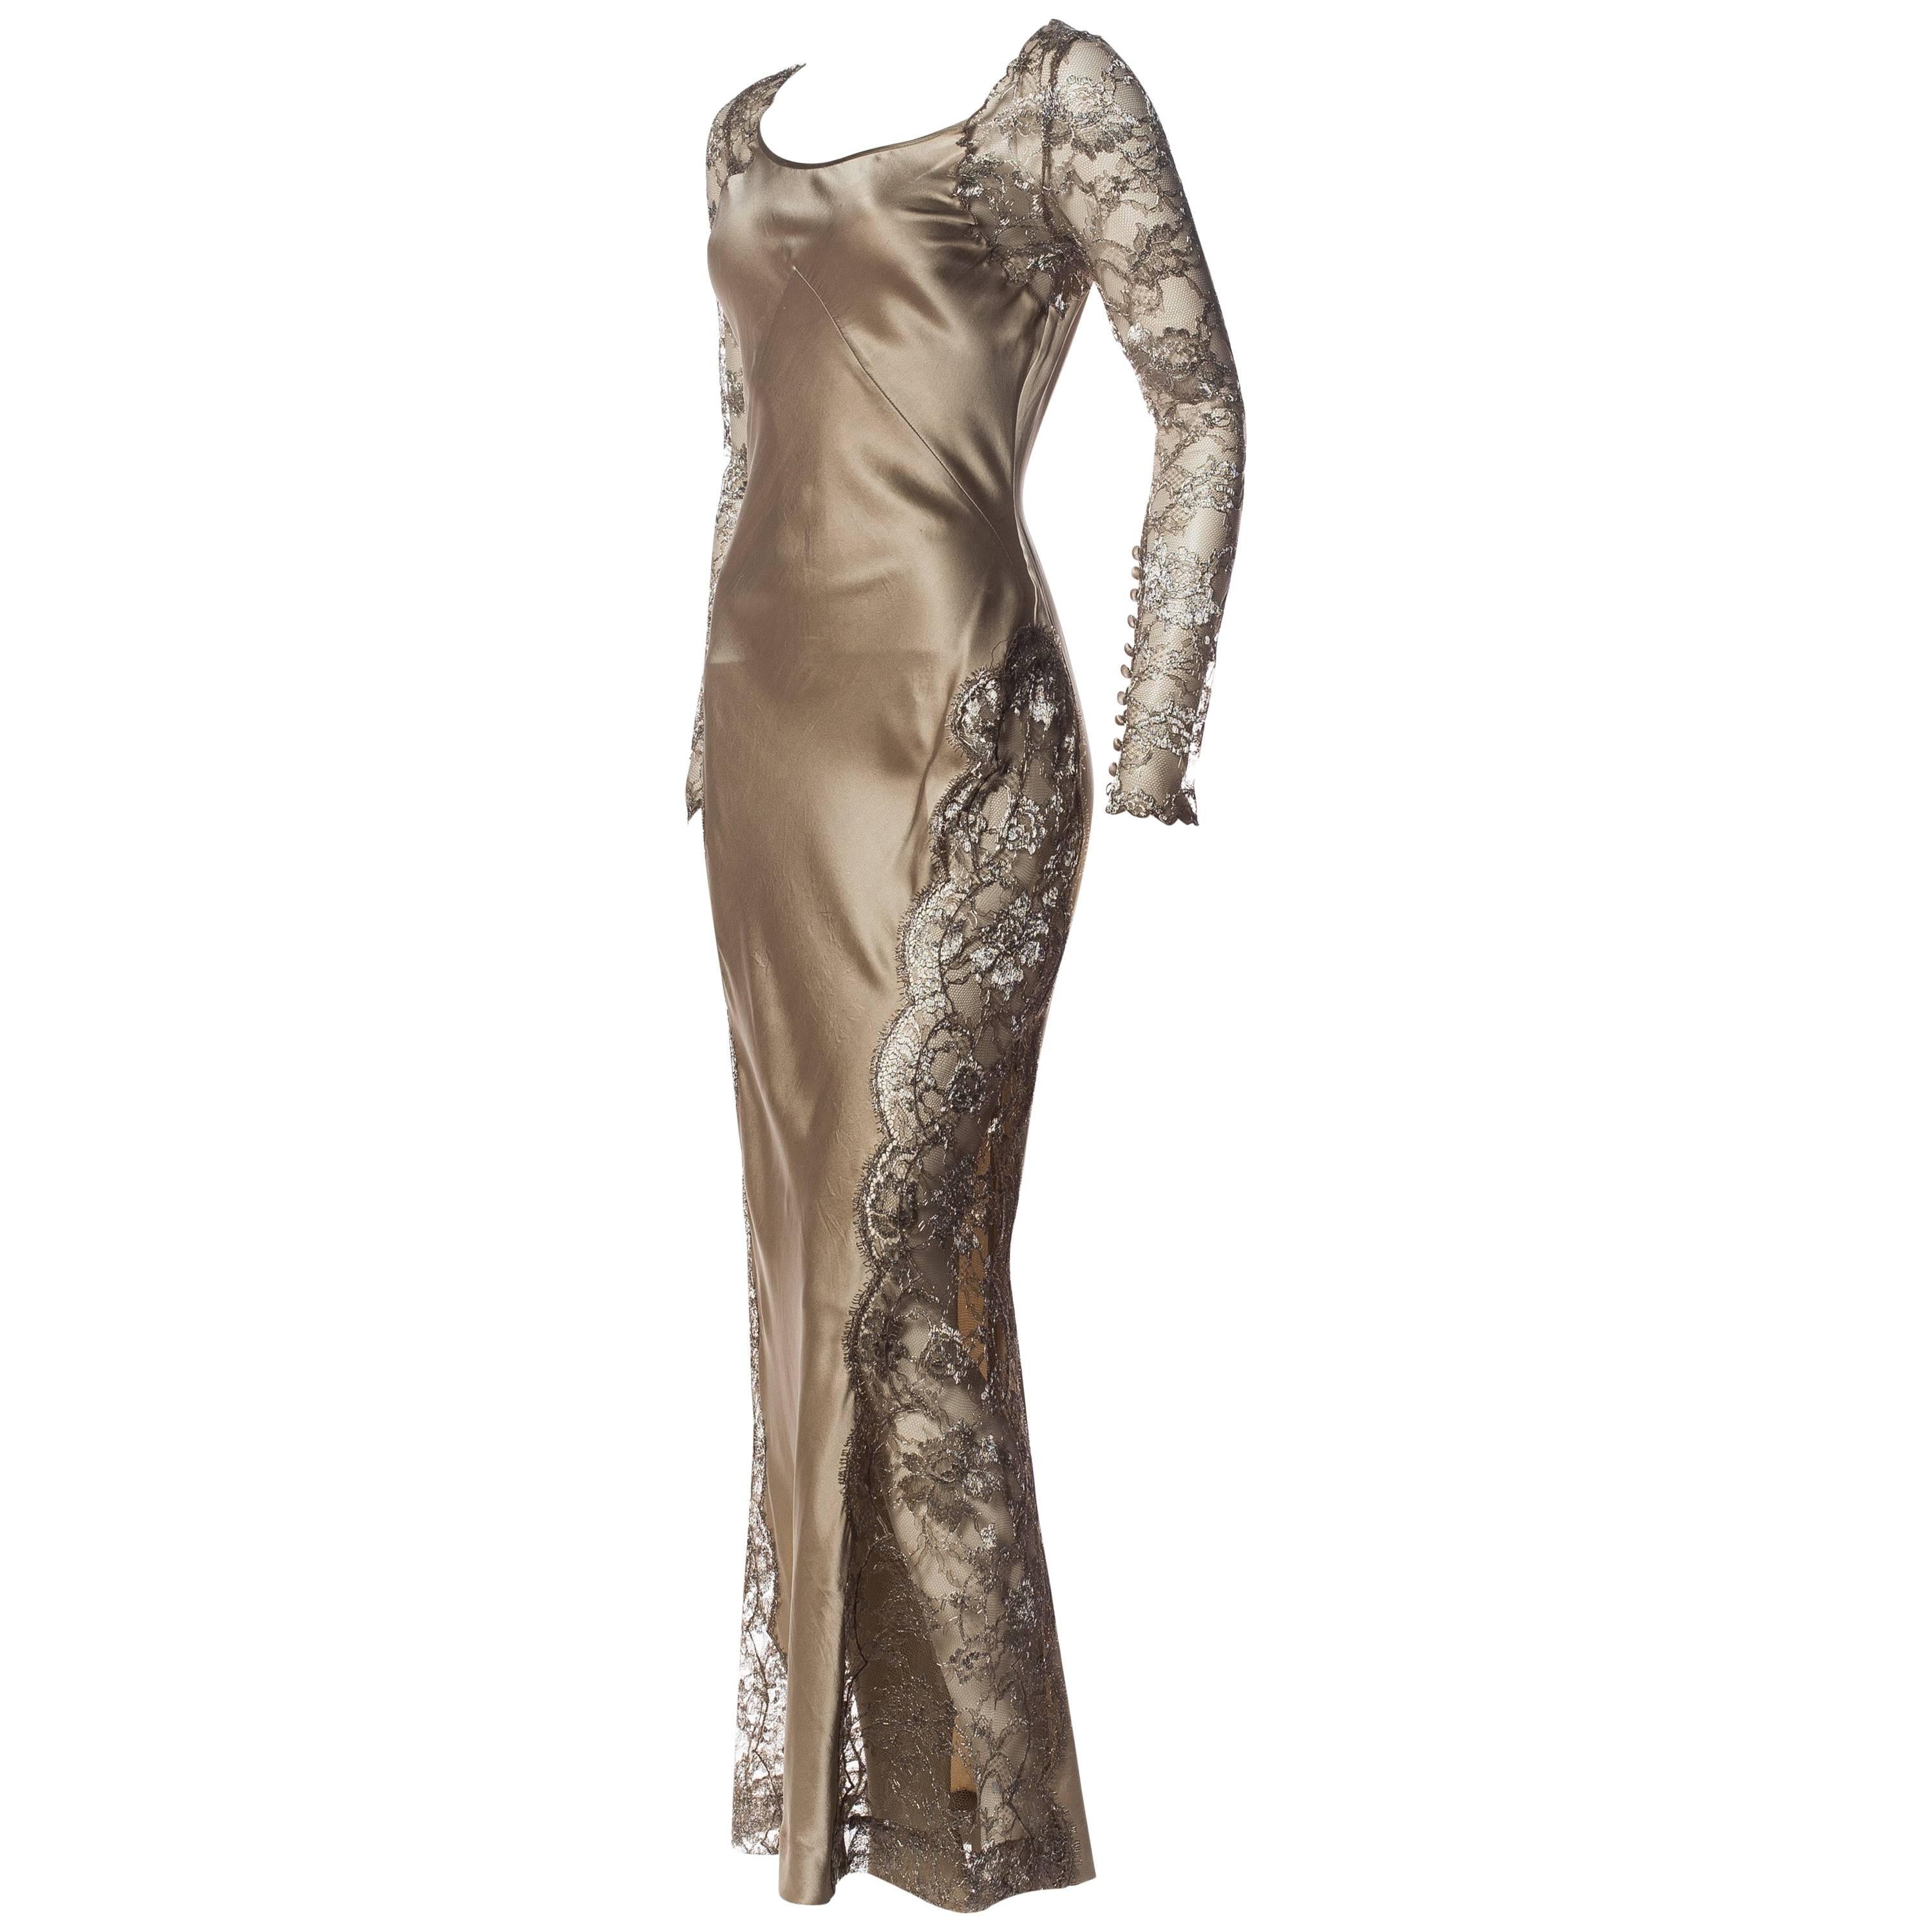 Richard Tyler Washed Silk And Lace Bias Cut Gown Dress For Sale